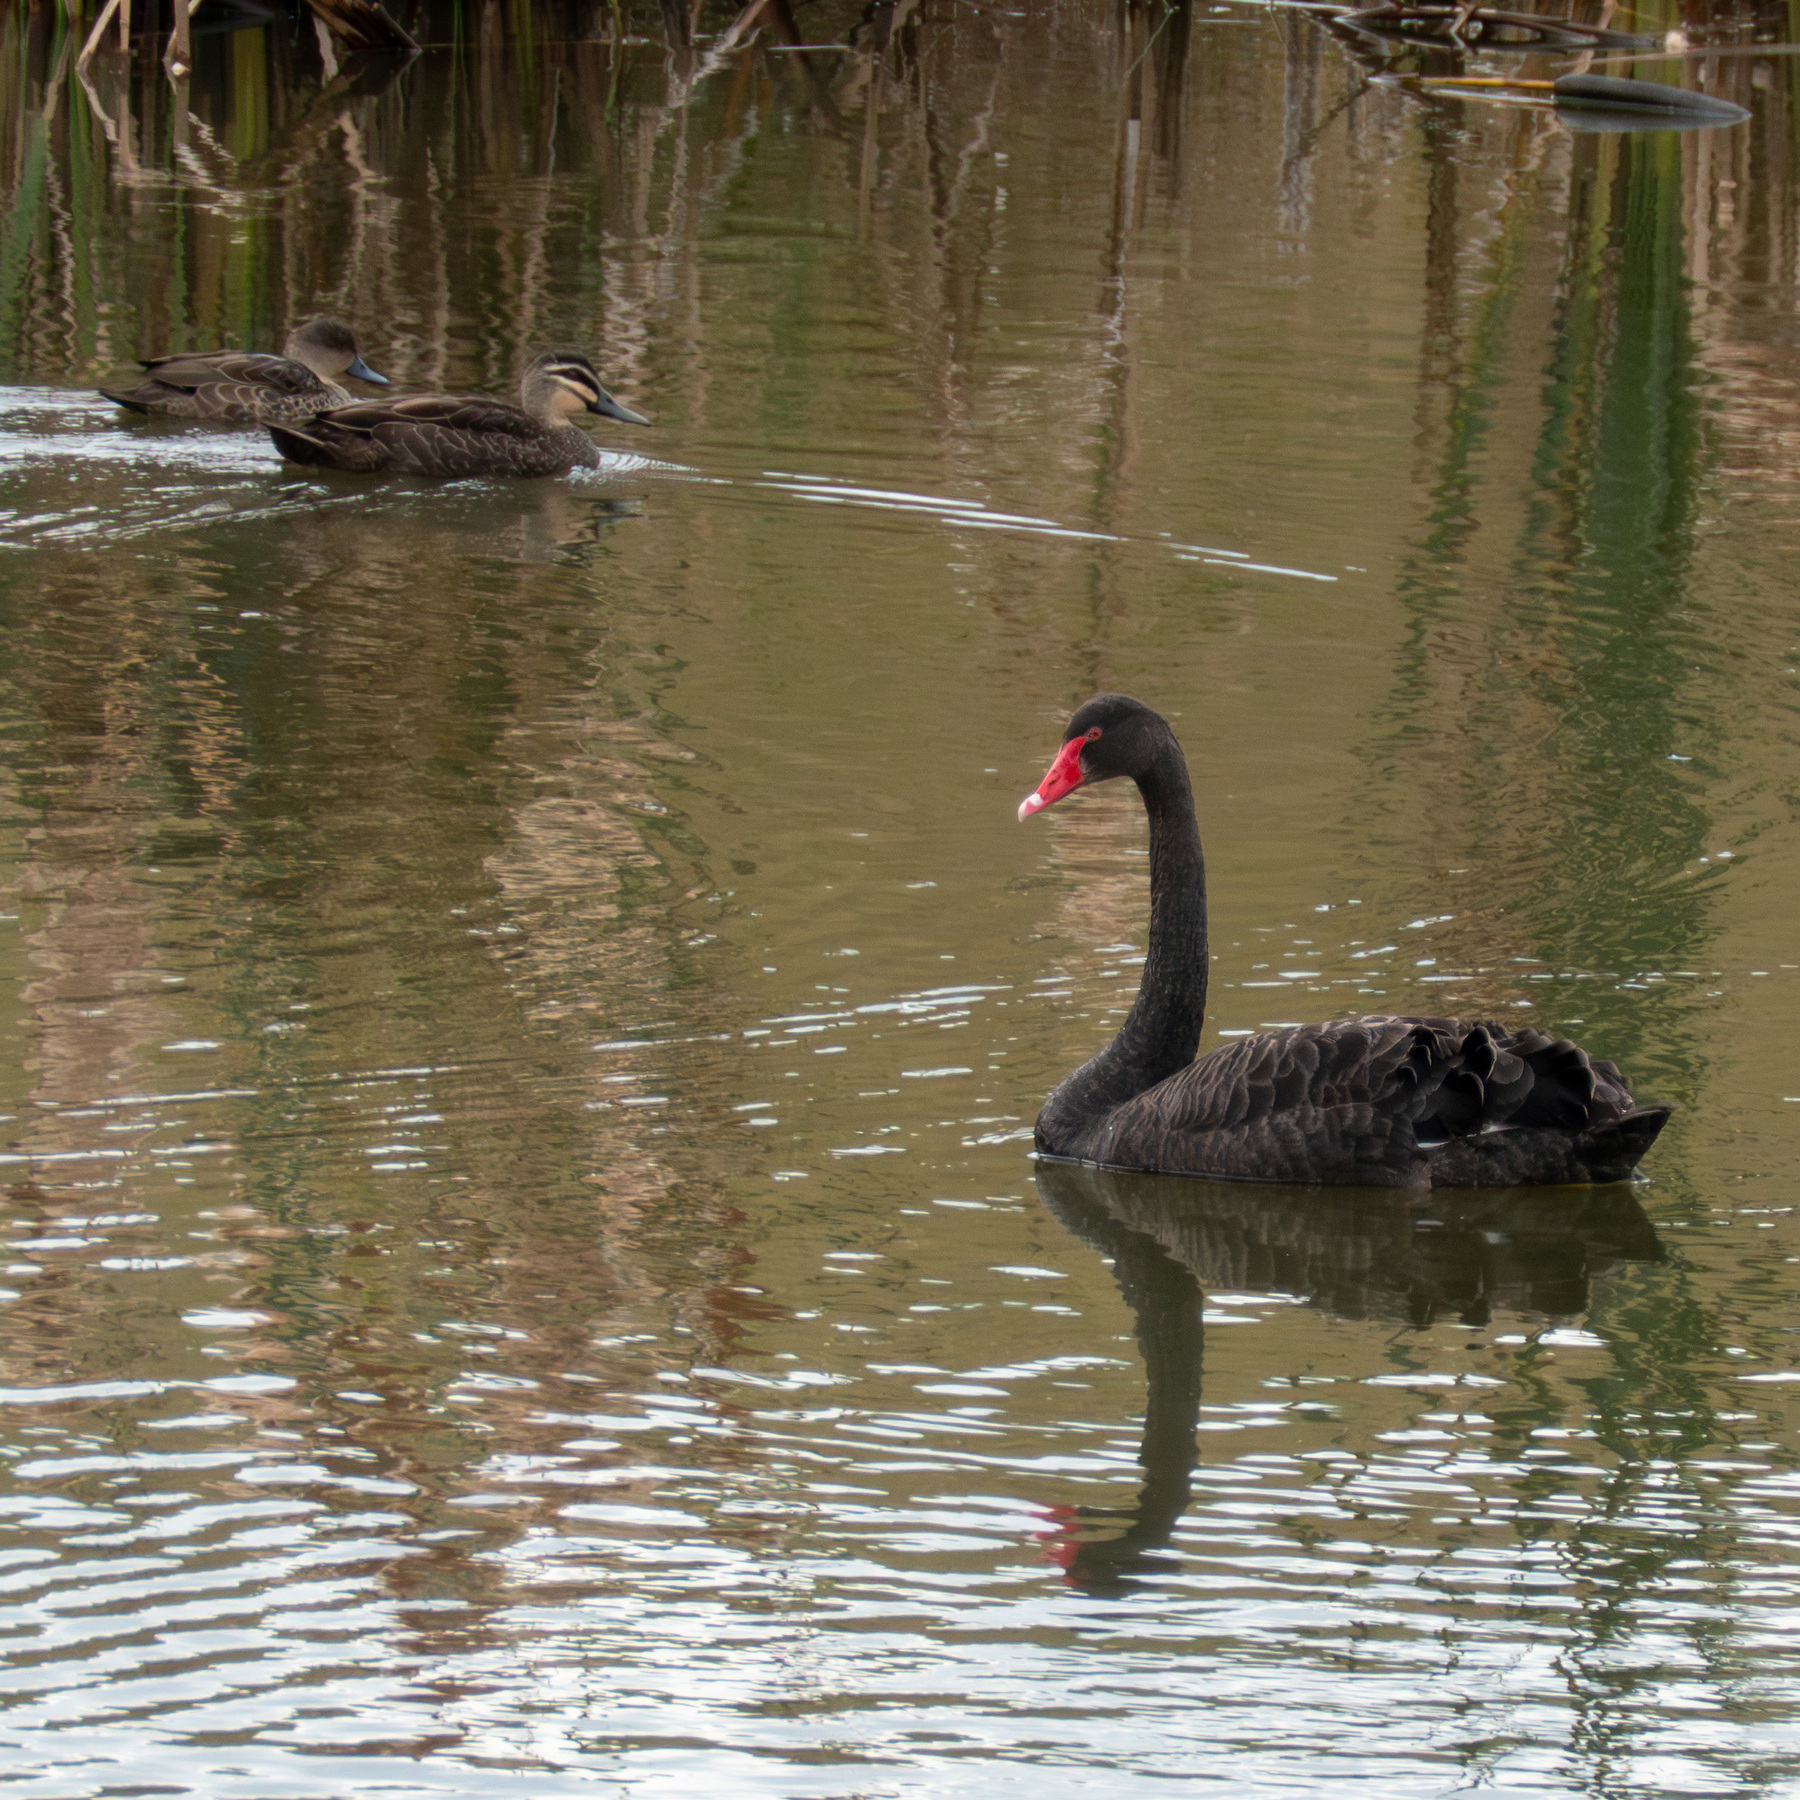 A black swan on a pond with two ducks in the background.